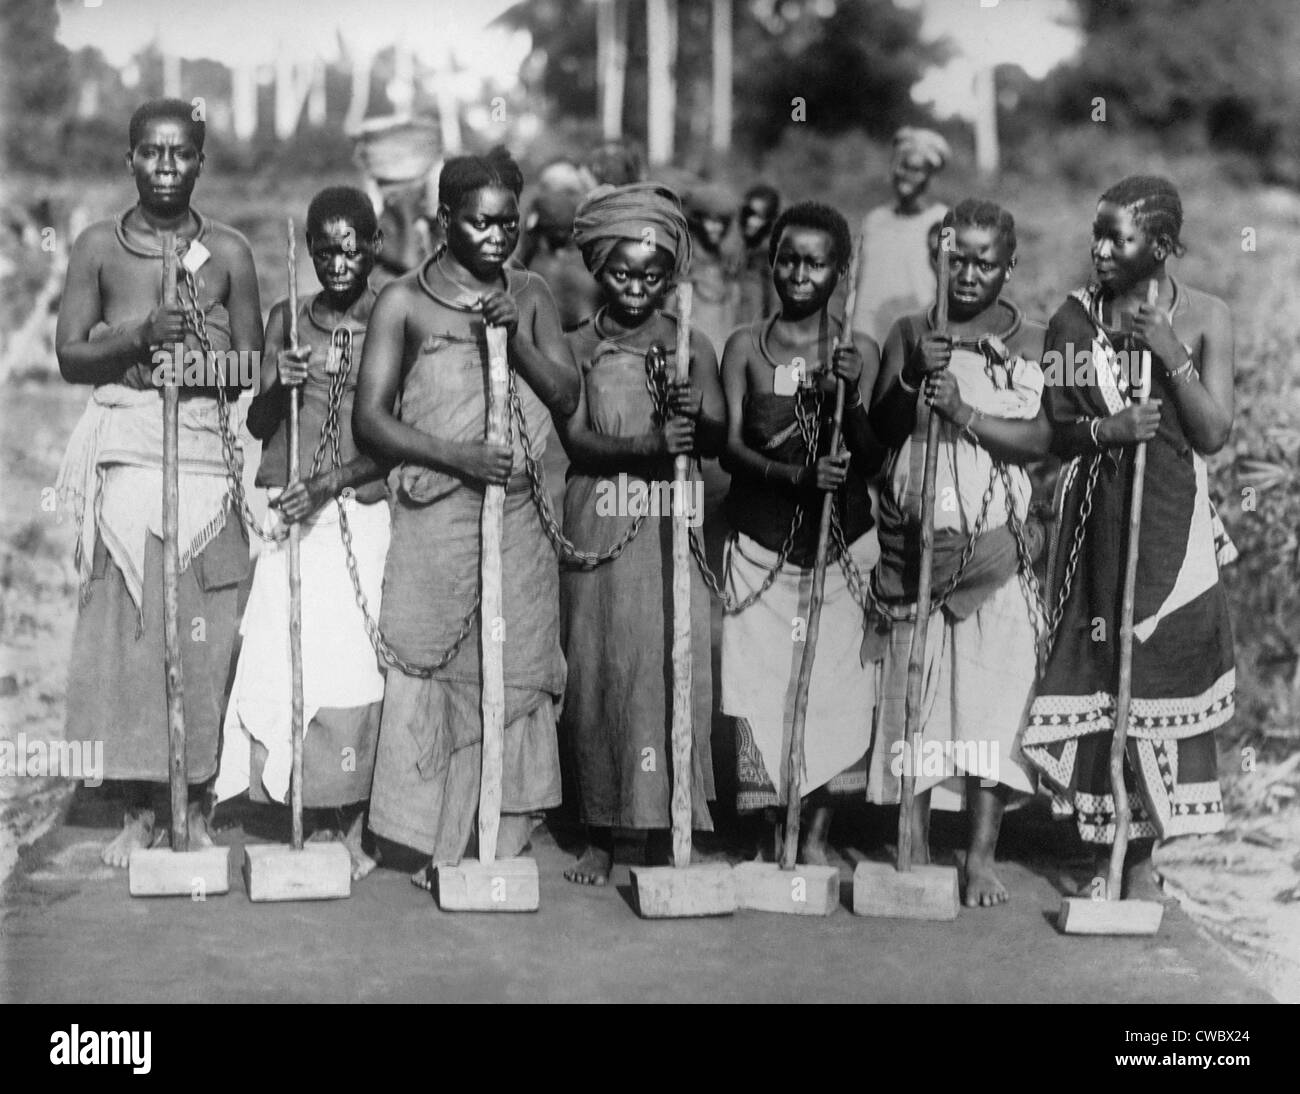 Women convicts working on road while chained together by neck rings in Tanganyika, East Africa ca. 1915. Stock Photo